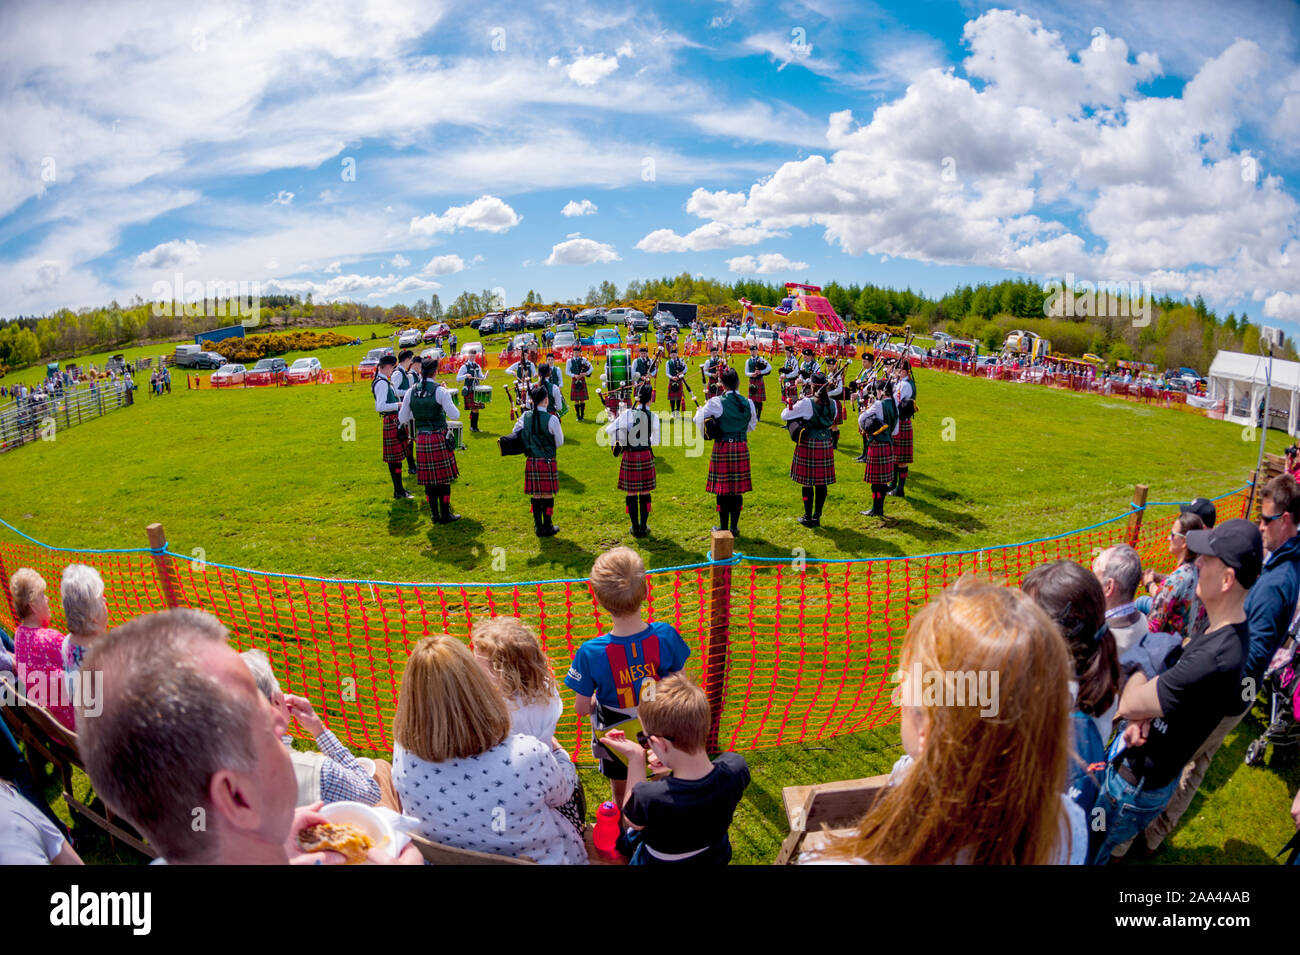 Pipe band at The Village Cattle show at the Knapps Kilmacolm Scotland. Stock Photo